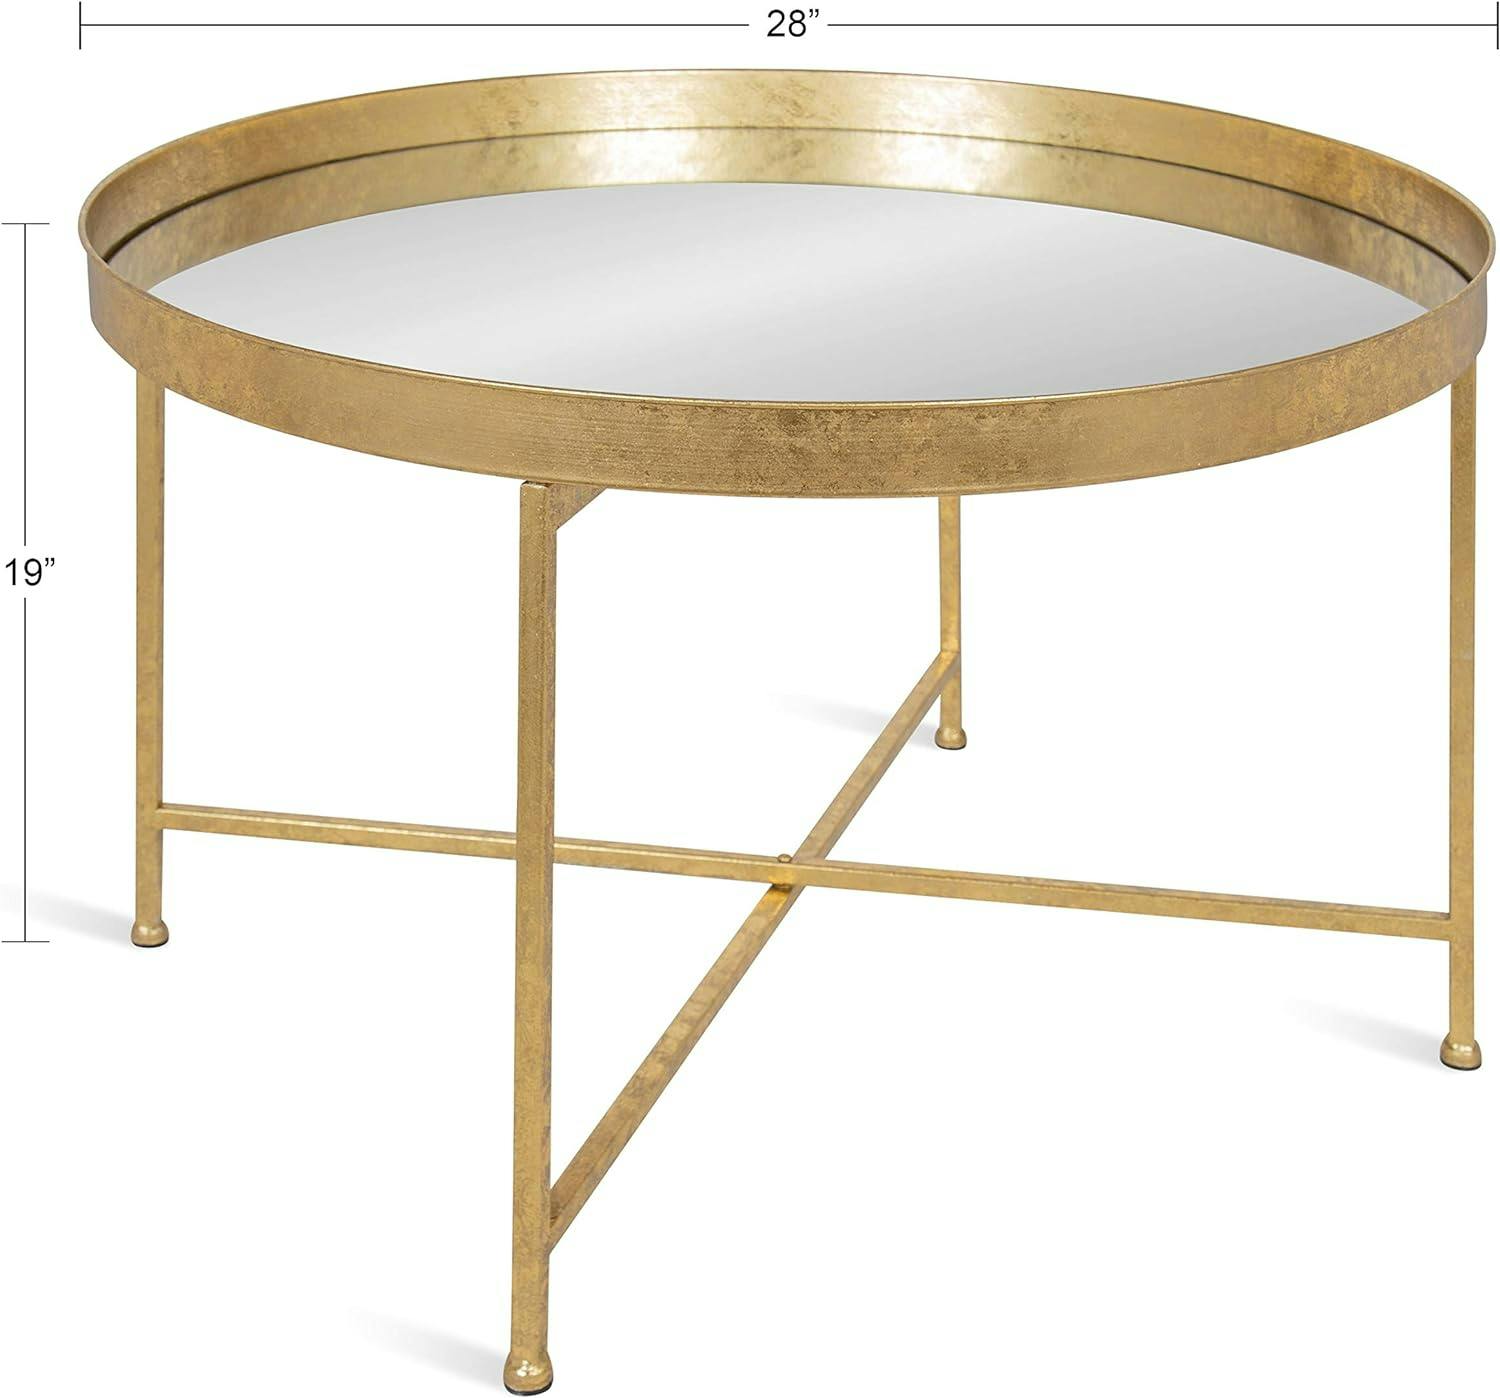 Luxurious Gold and Mirrored Round Wood Coffee Table